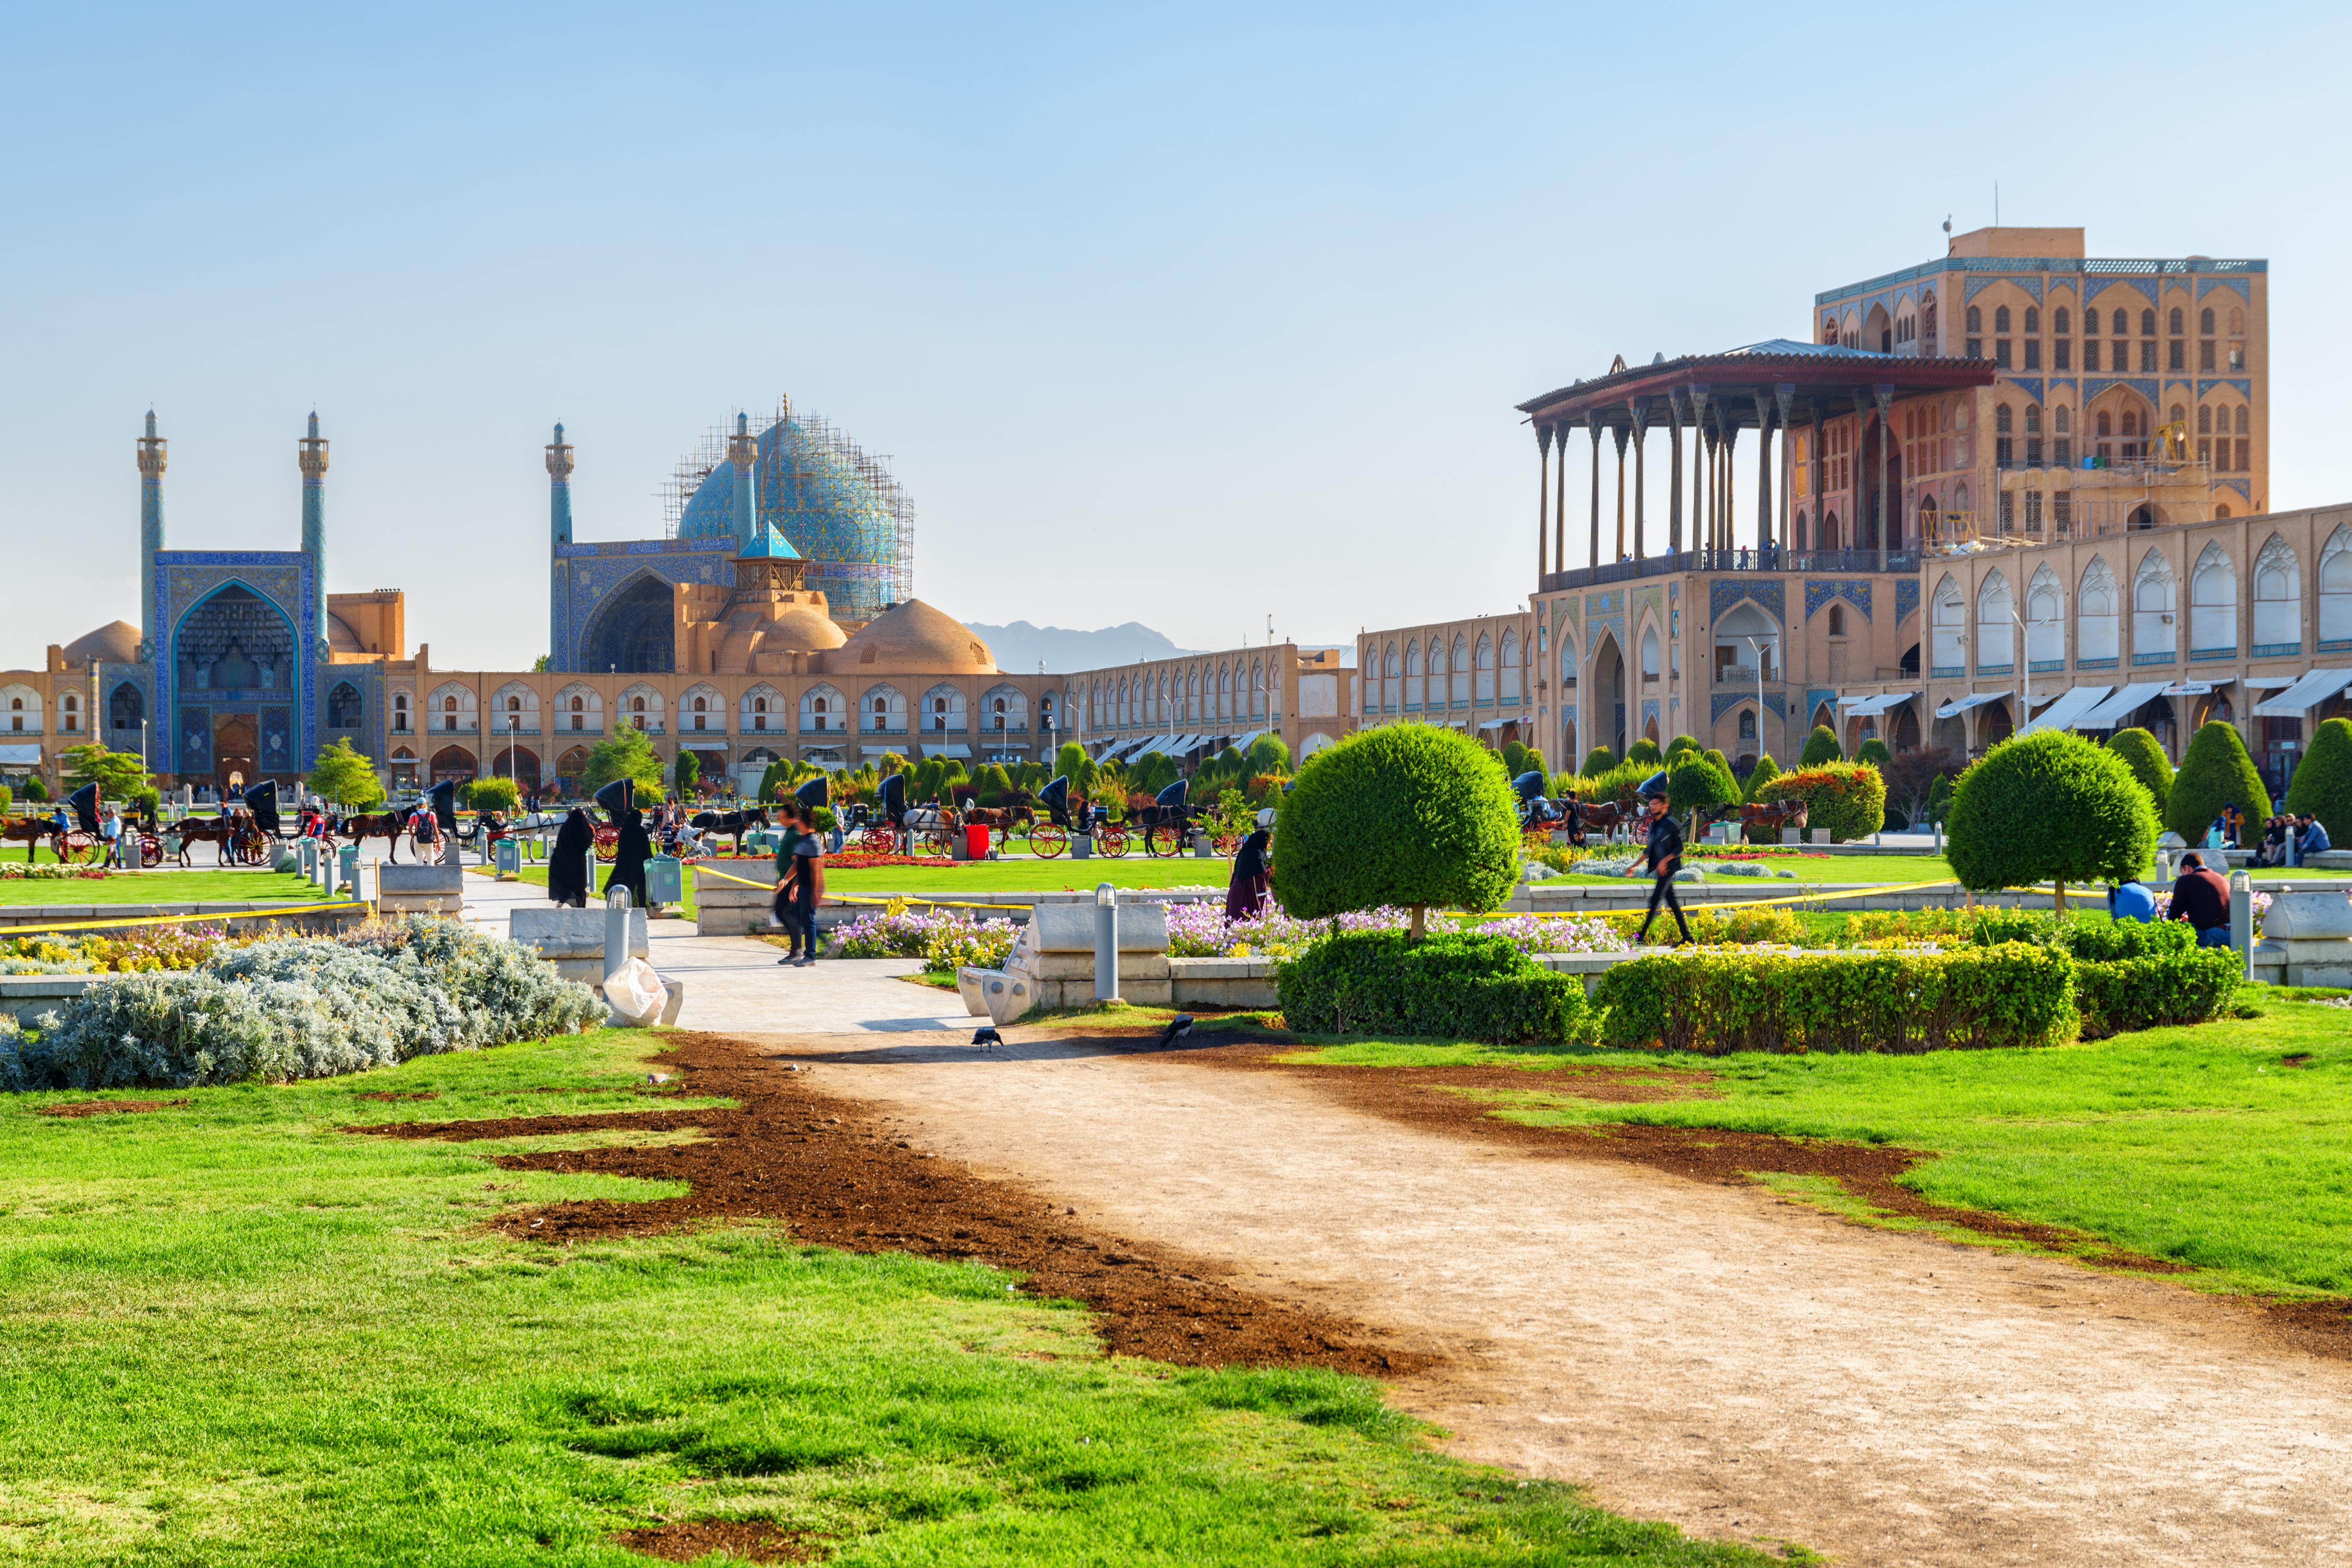 The large square is surrounded by historic sites including the impressive Ali Qapu Palace